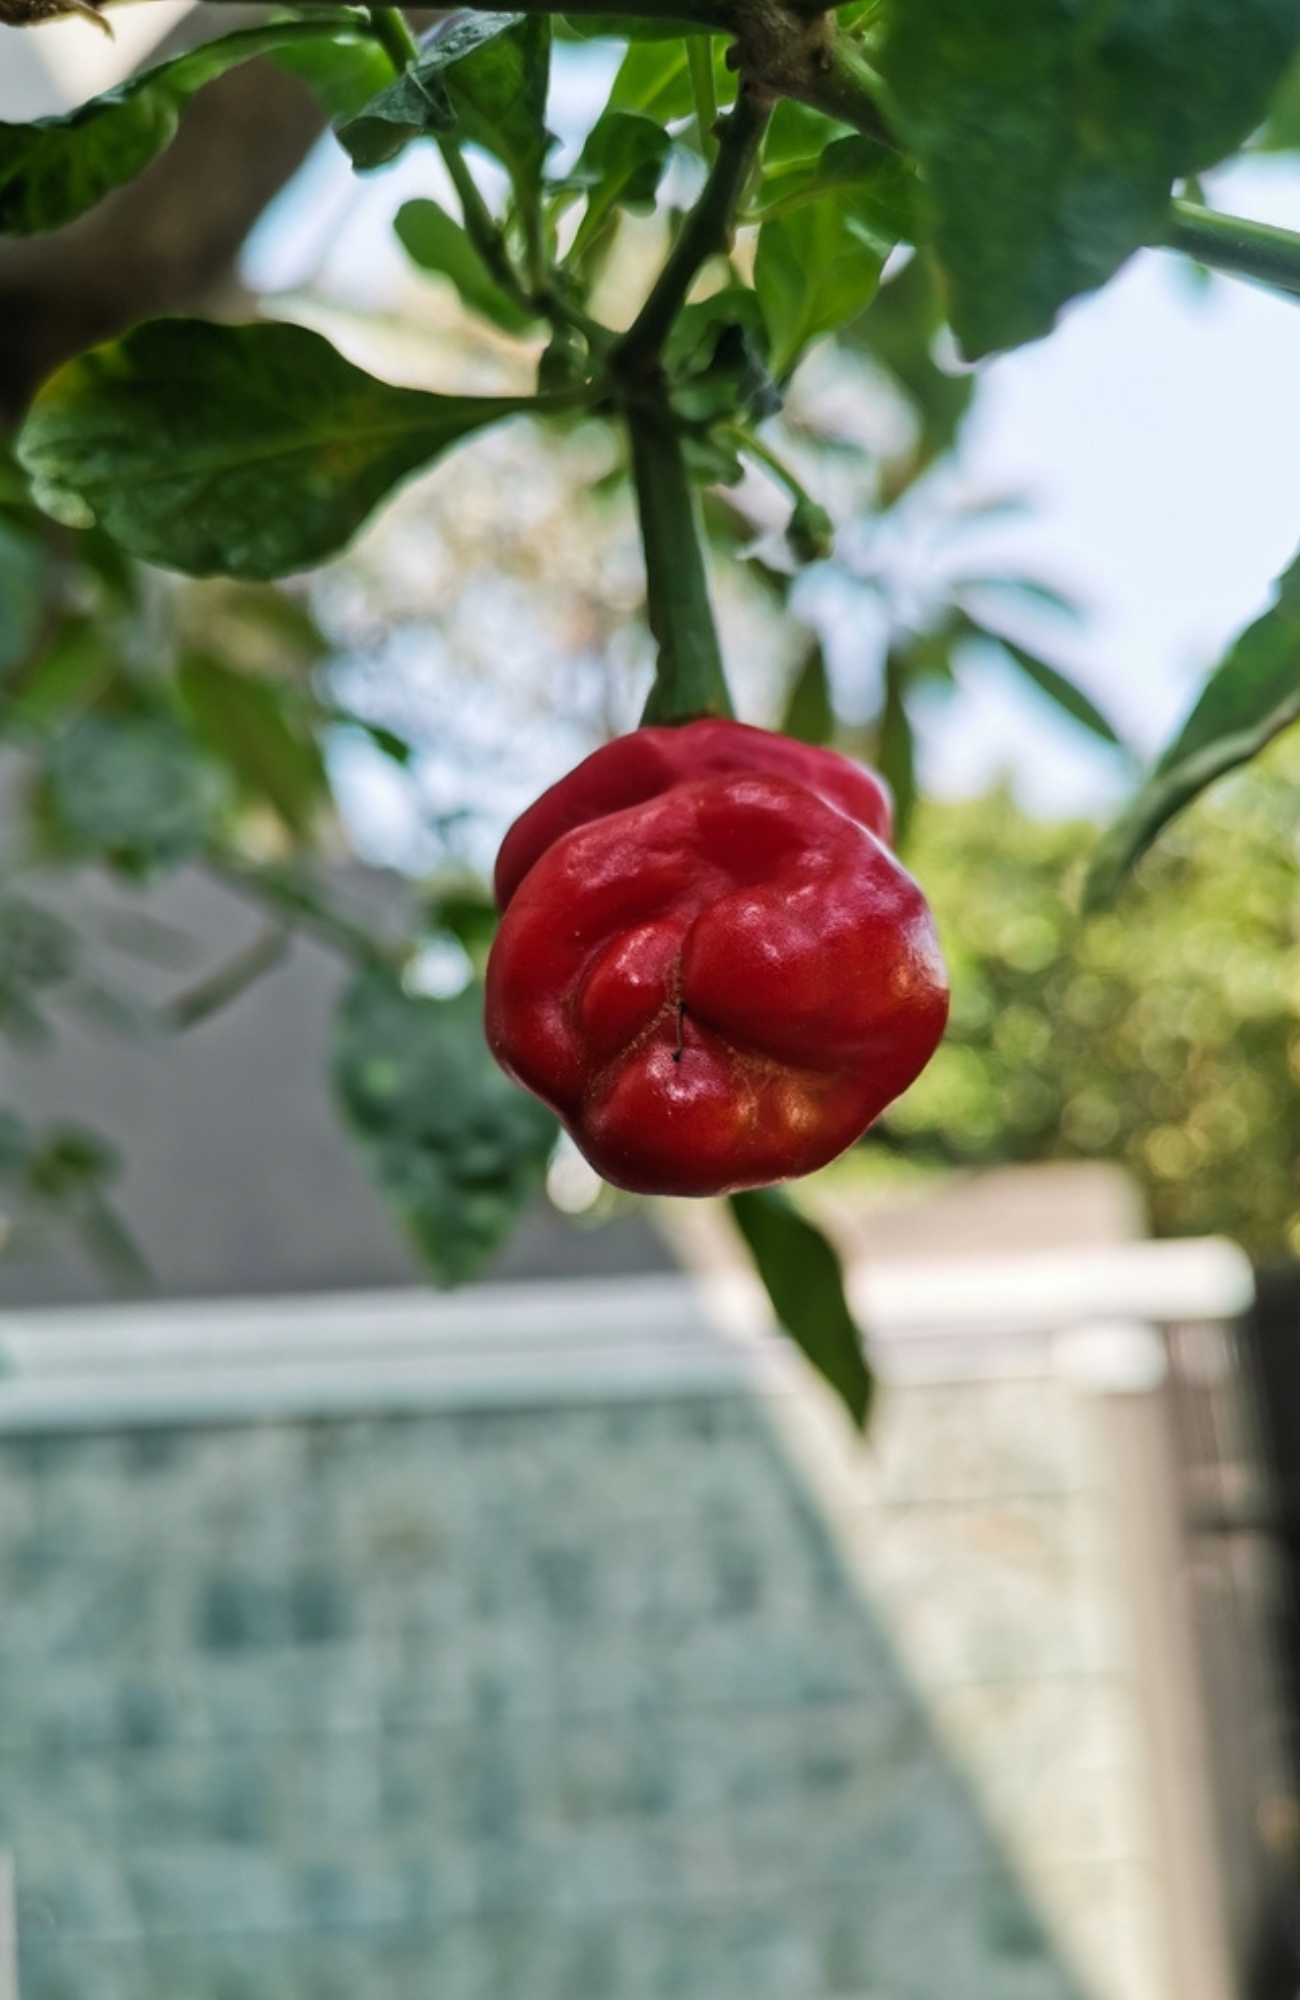 Discover Chilli Pepper Peter Seeds - Grow Your Hot Harvest!